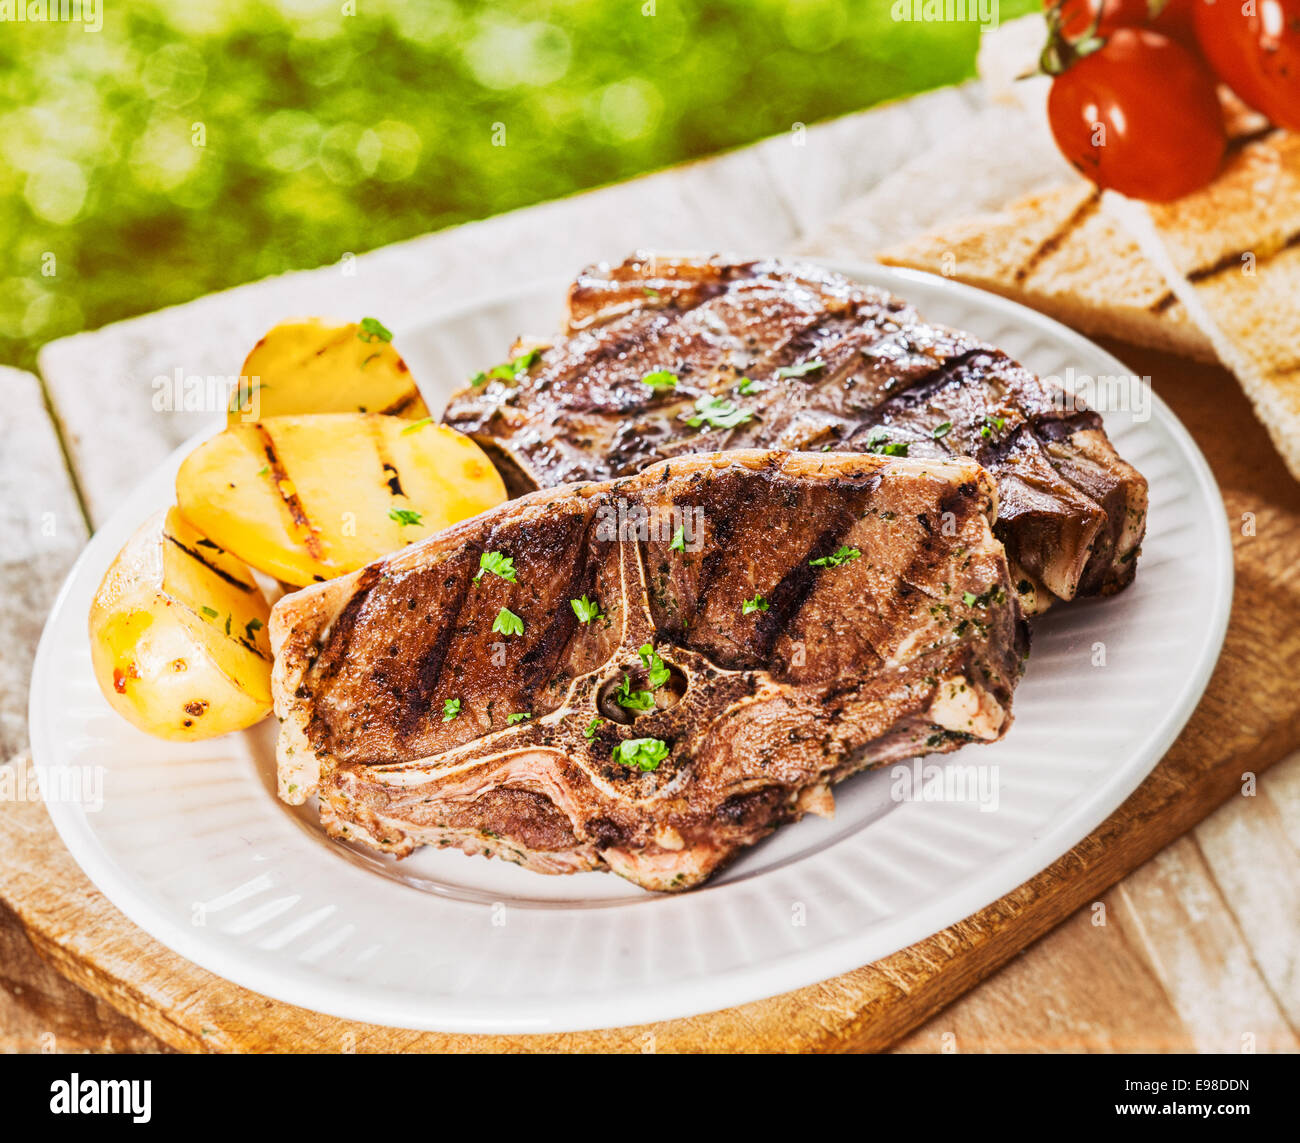 Healthy lean lamb chops with grilled potato served at an outdoor summer BBQ on a rustic wooden picnic table for a wholesome nutritious lunch Stock Photo